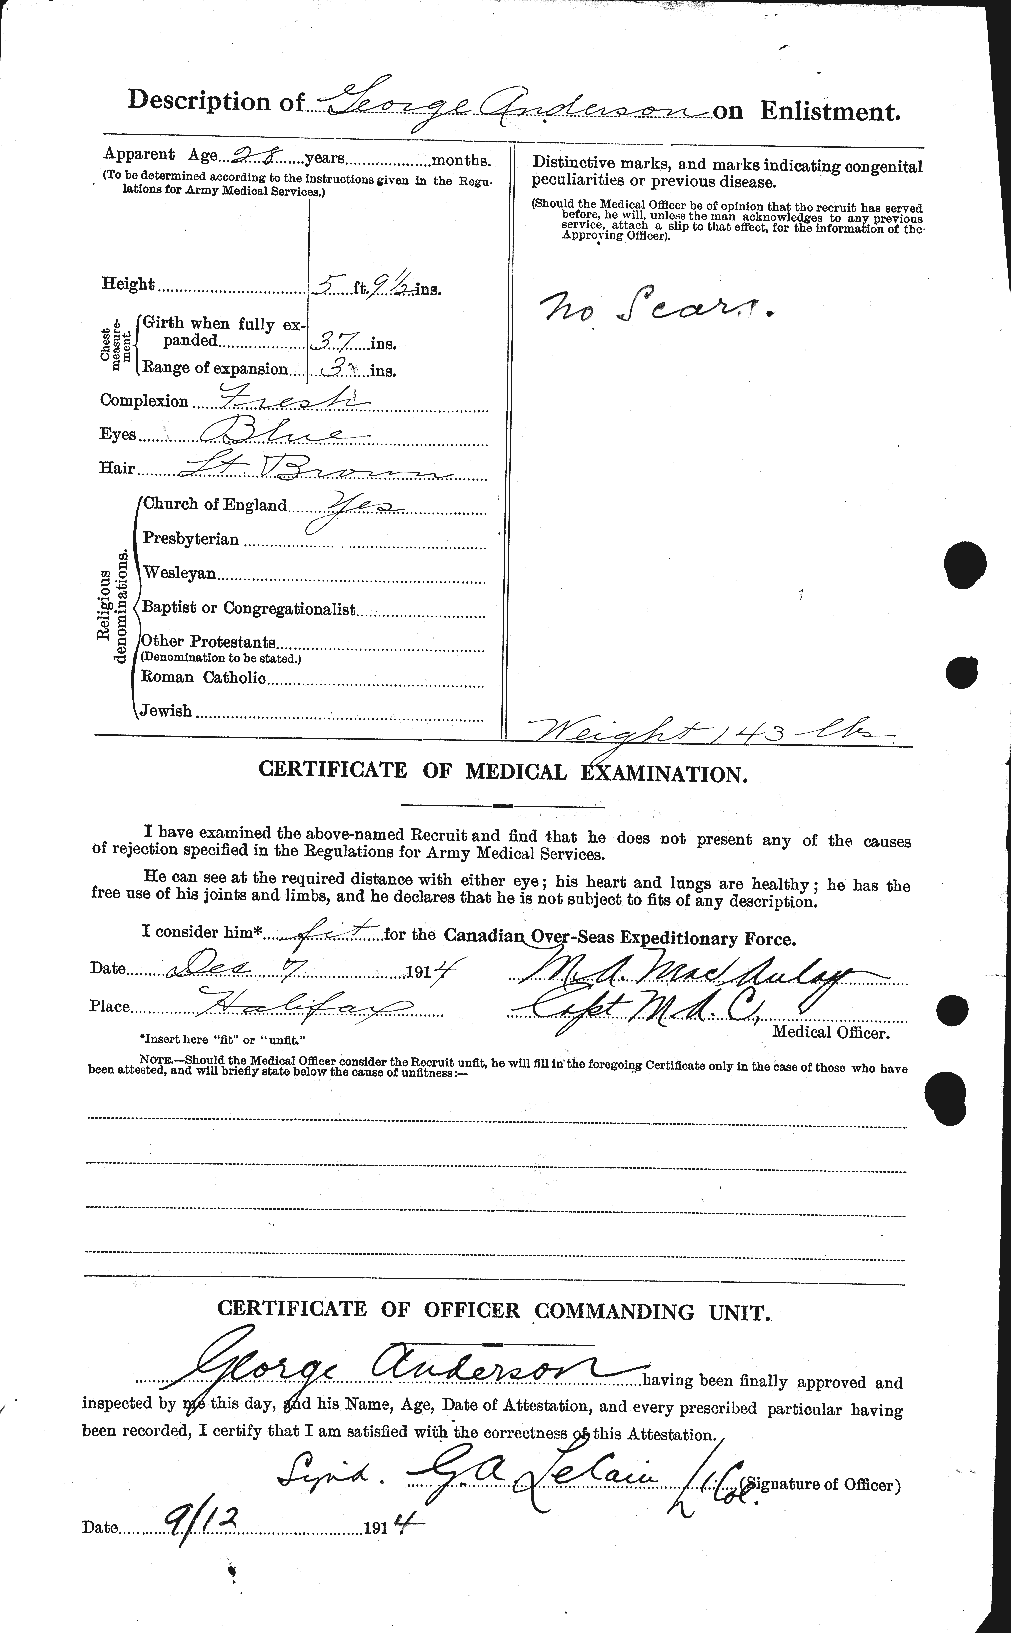 Personnel Records of the First World War - CEF 209770b